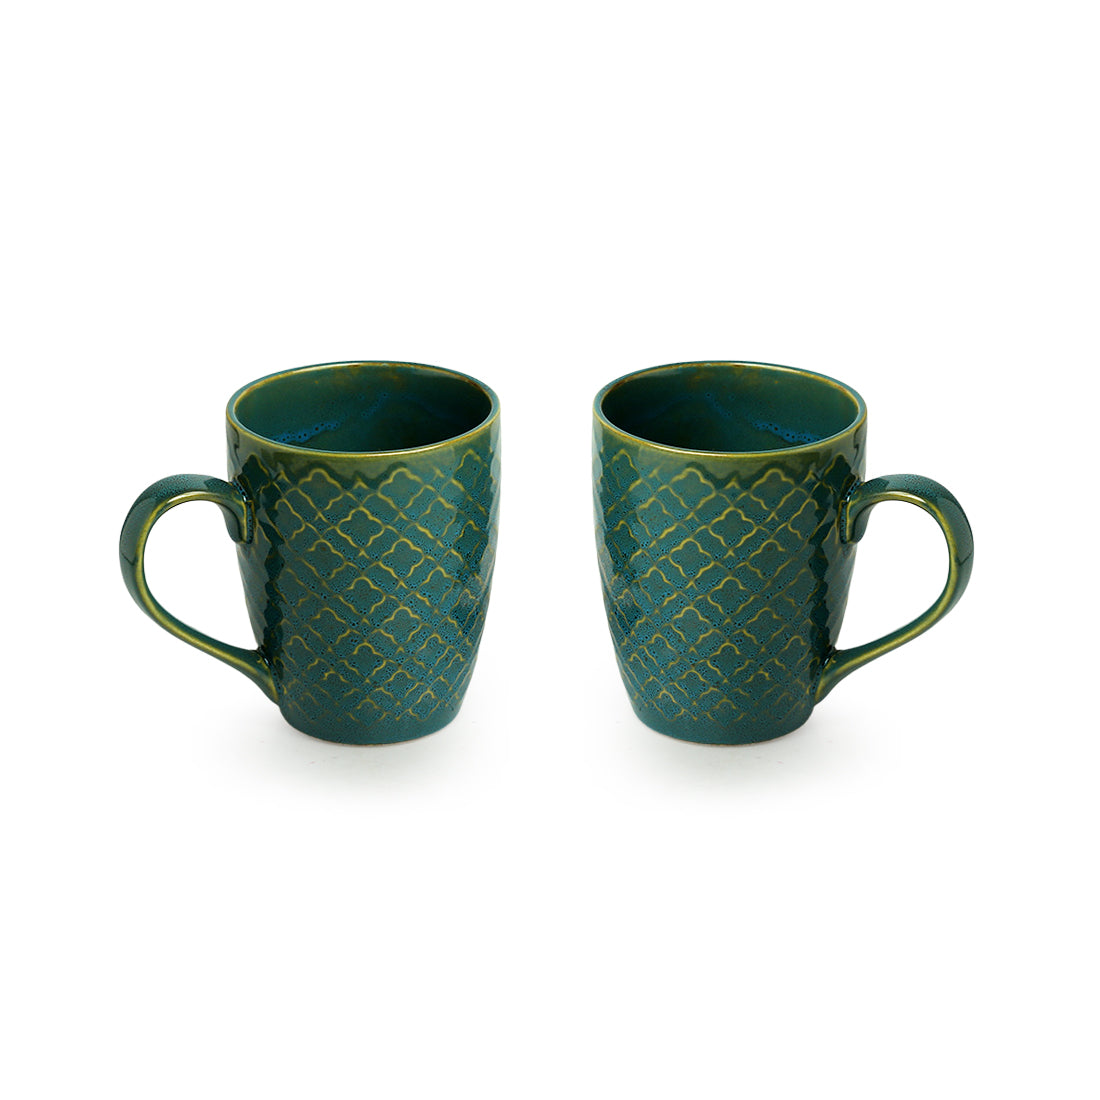 'Moroccan Turqouise' Hand Glazed & Embossed Coffee Mugs In Ceramic (Set Of 2, 300 ML, Microwave Safe)